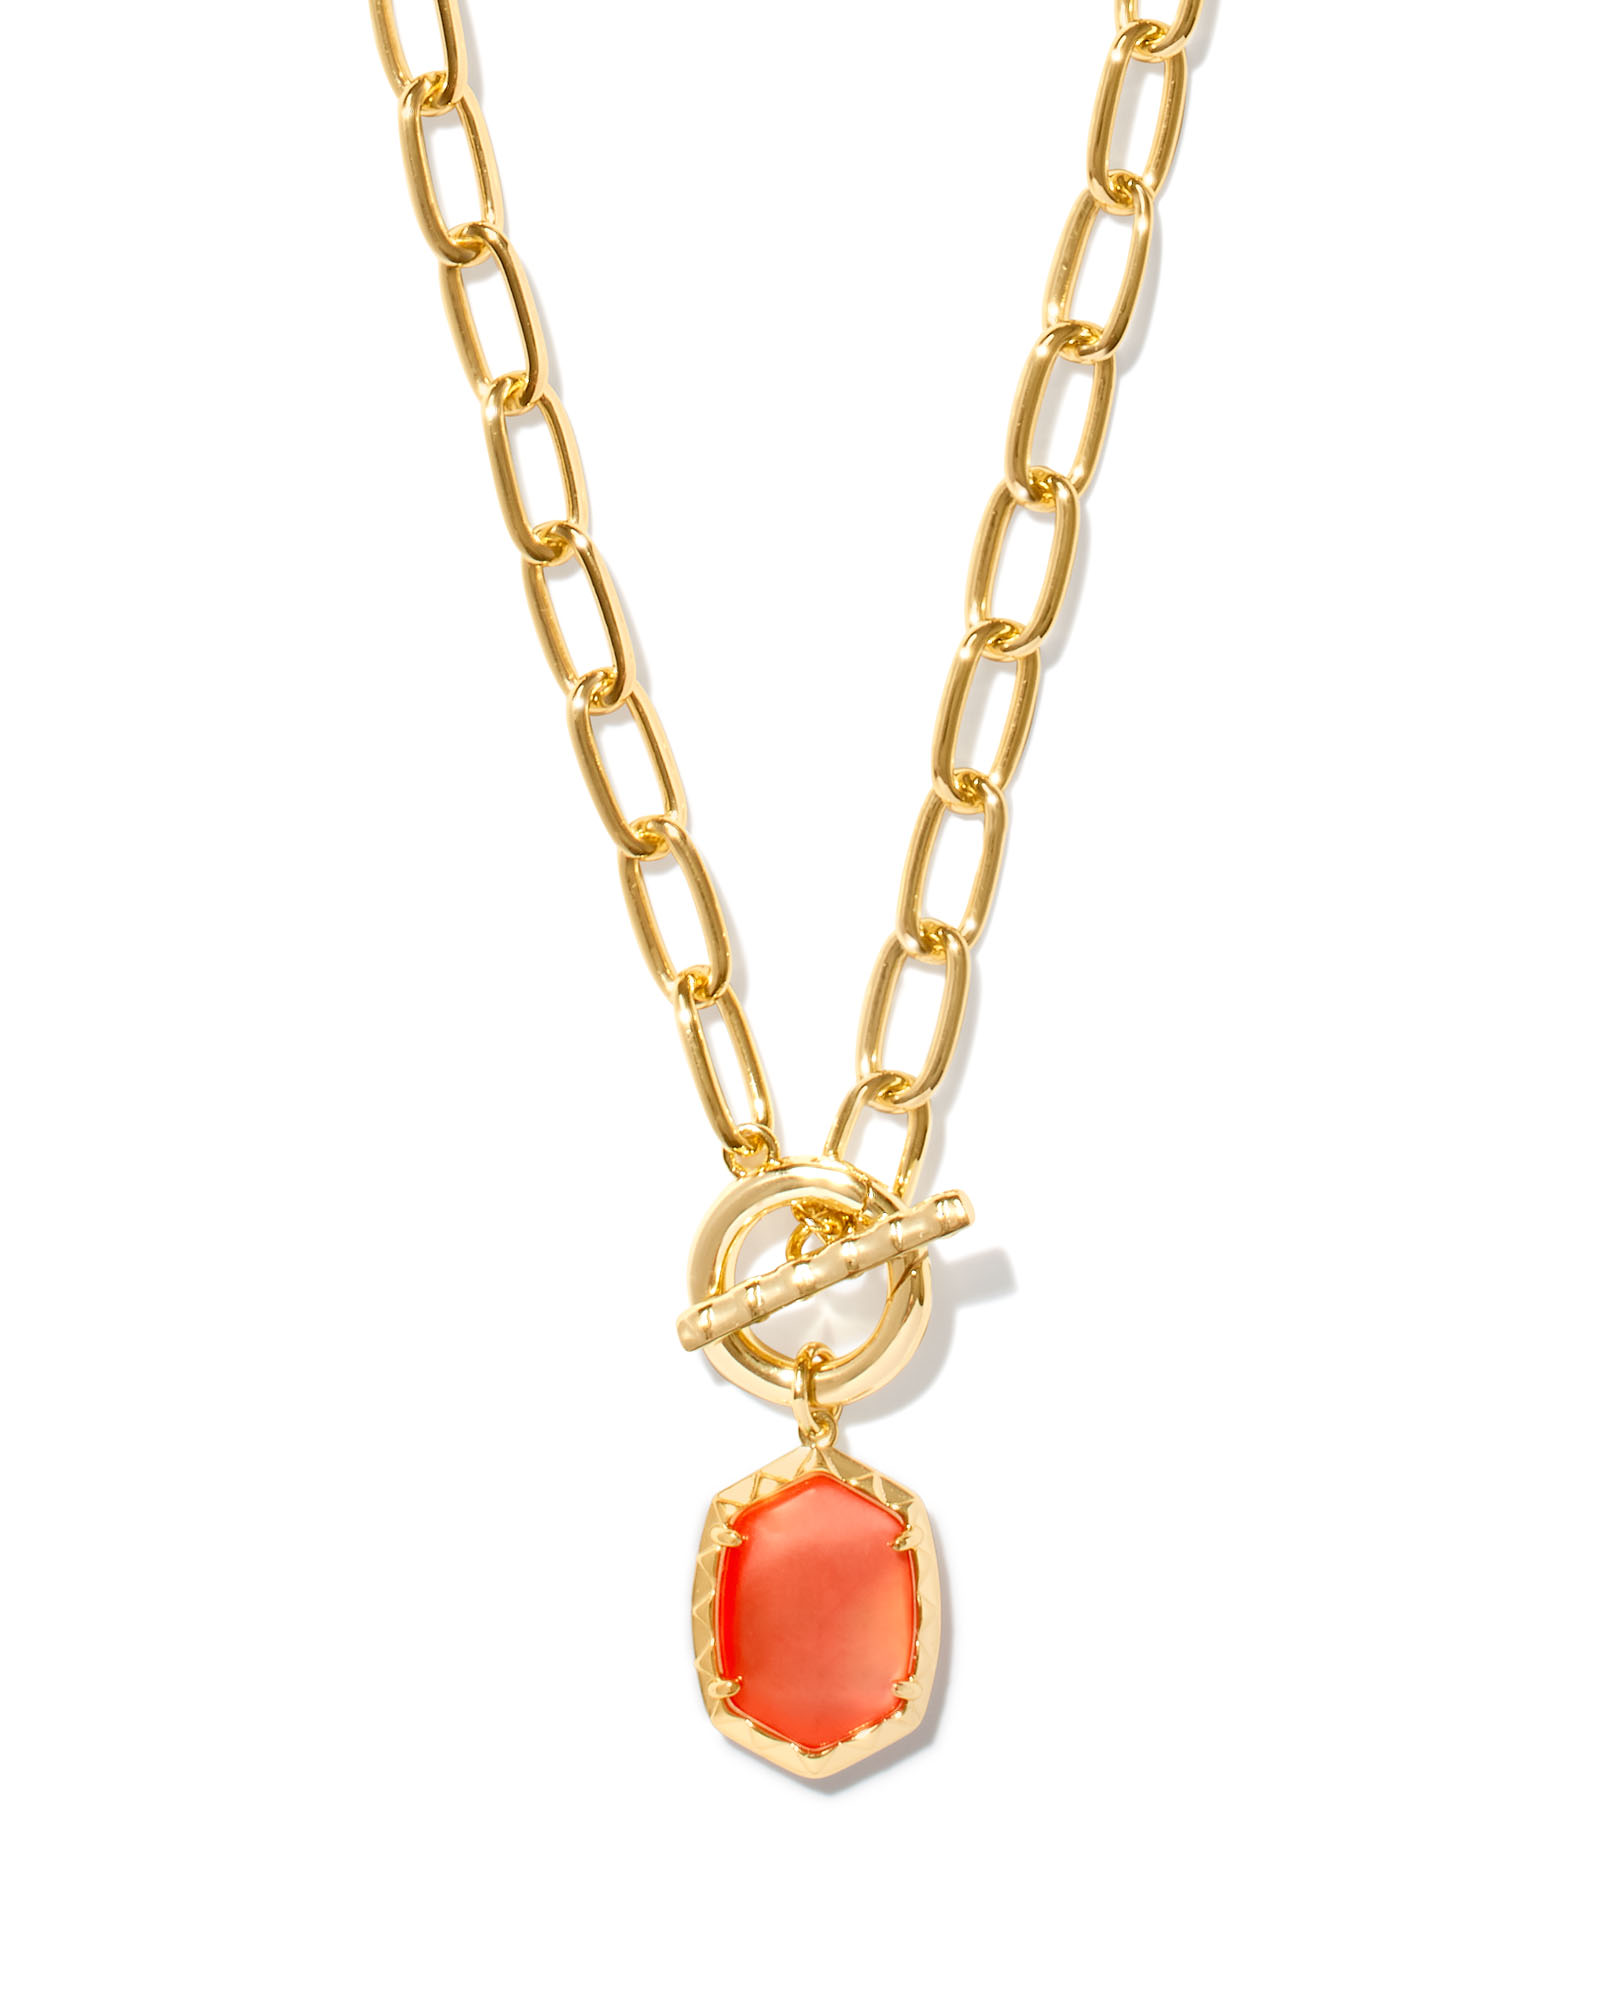 Daphne Convertible Gold Link and Chain Necklace in Coral Pink Mother-of-Pearl | Kendra Scott